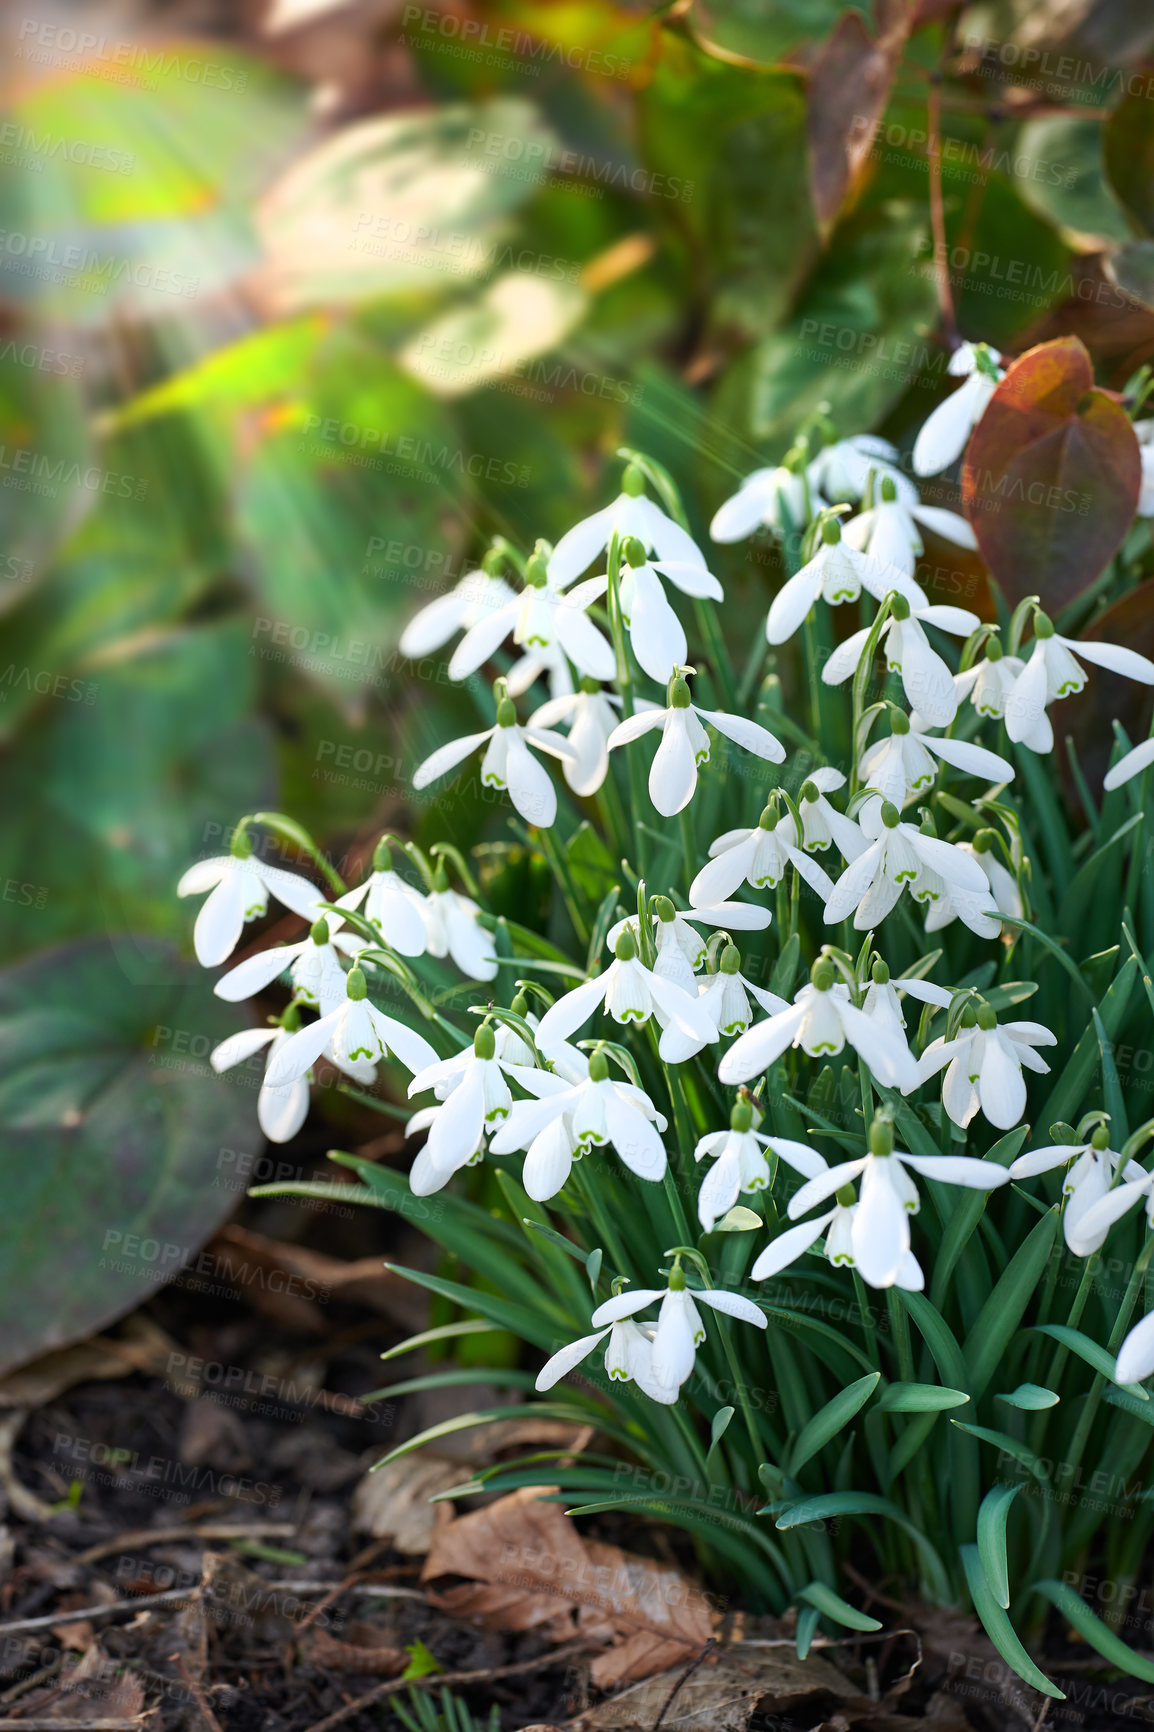 Buy stock photo Galanthus nivalis was described by the Swedish botanist Carl Linnaeus in his Species Plantarum in 1753, and given the specific epithet nivalis, meaning snowy (Galanthus means with milk-white flowers).